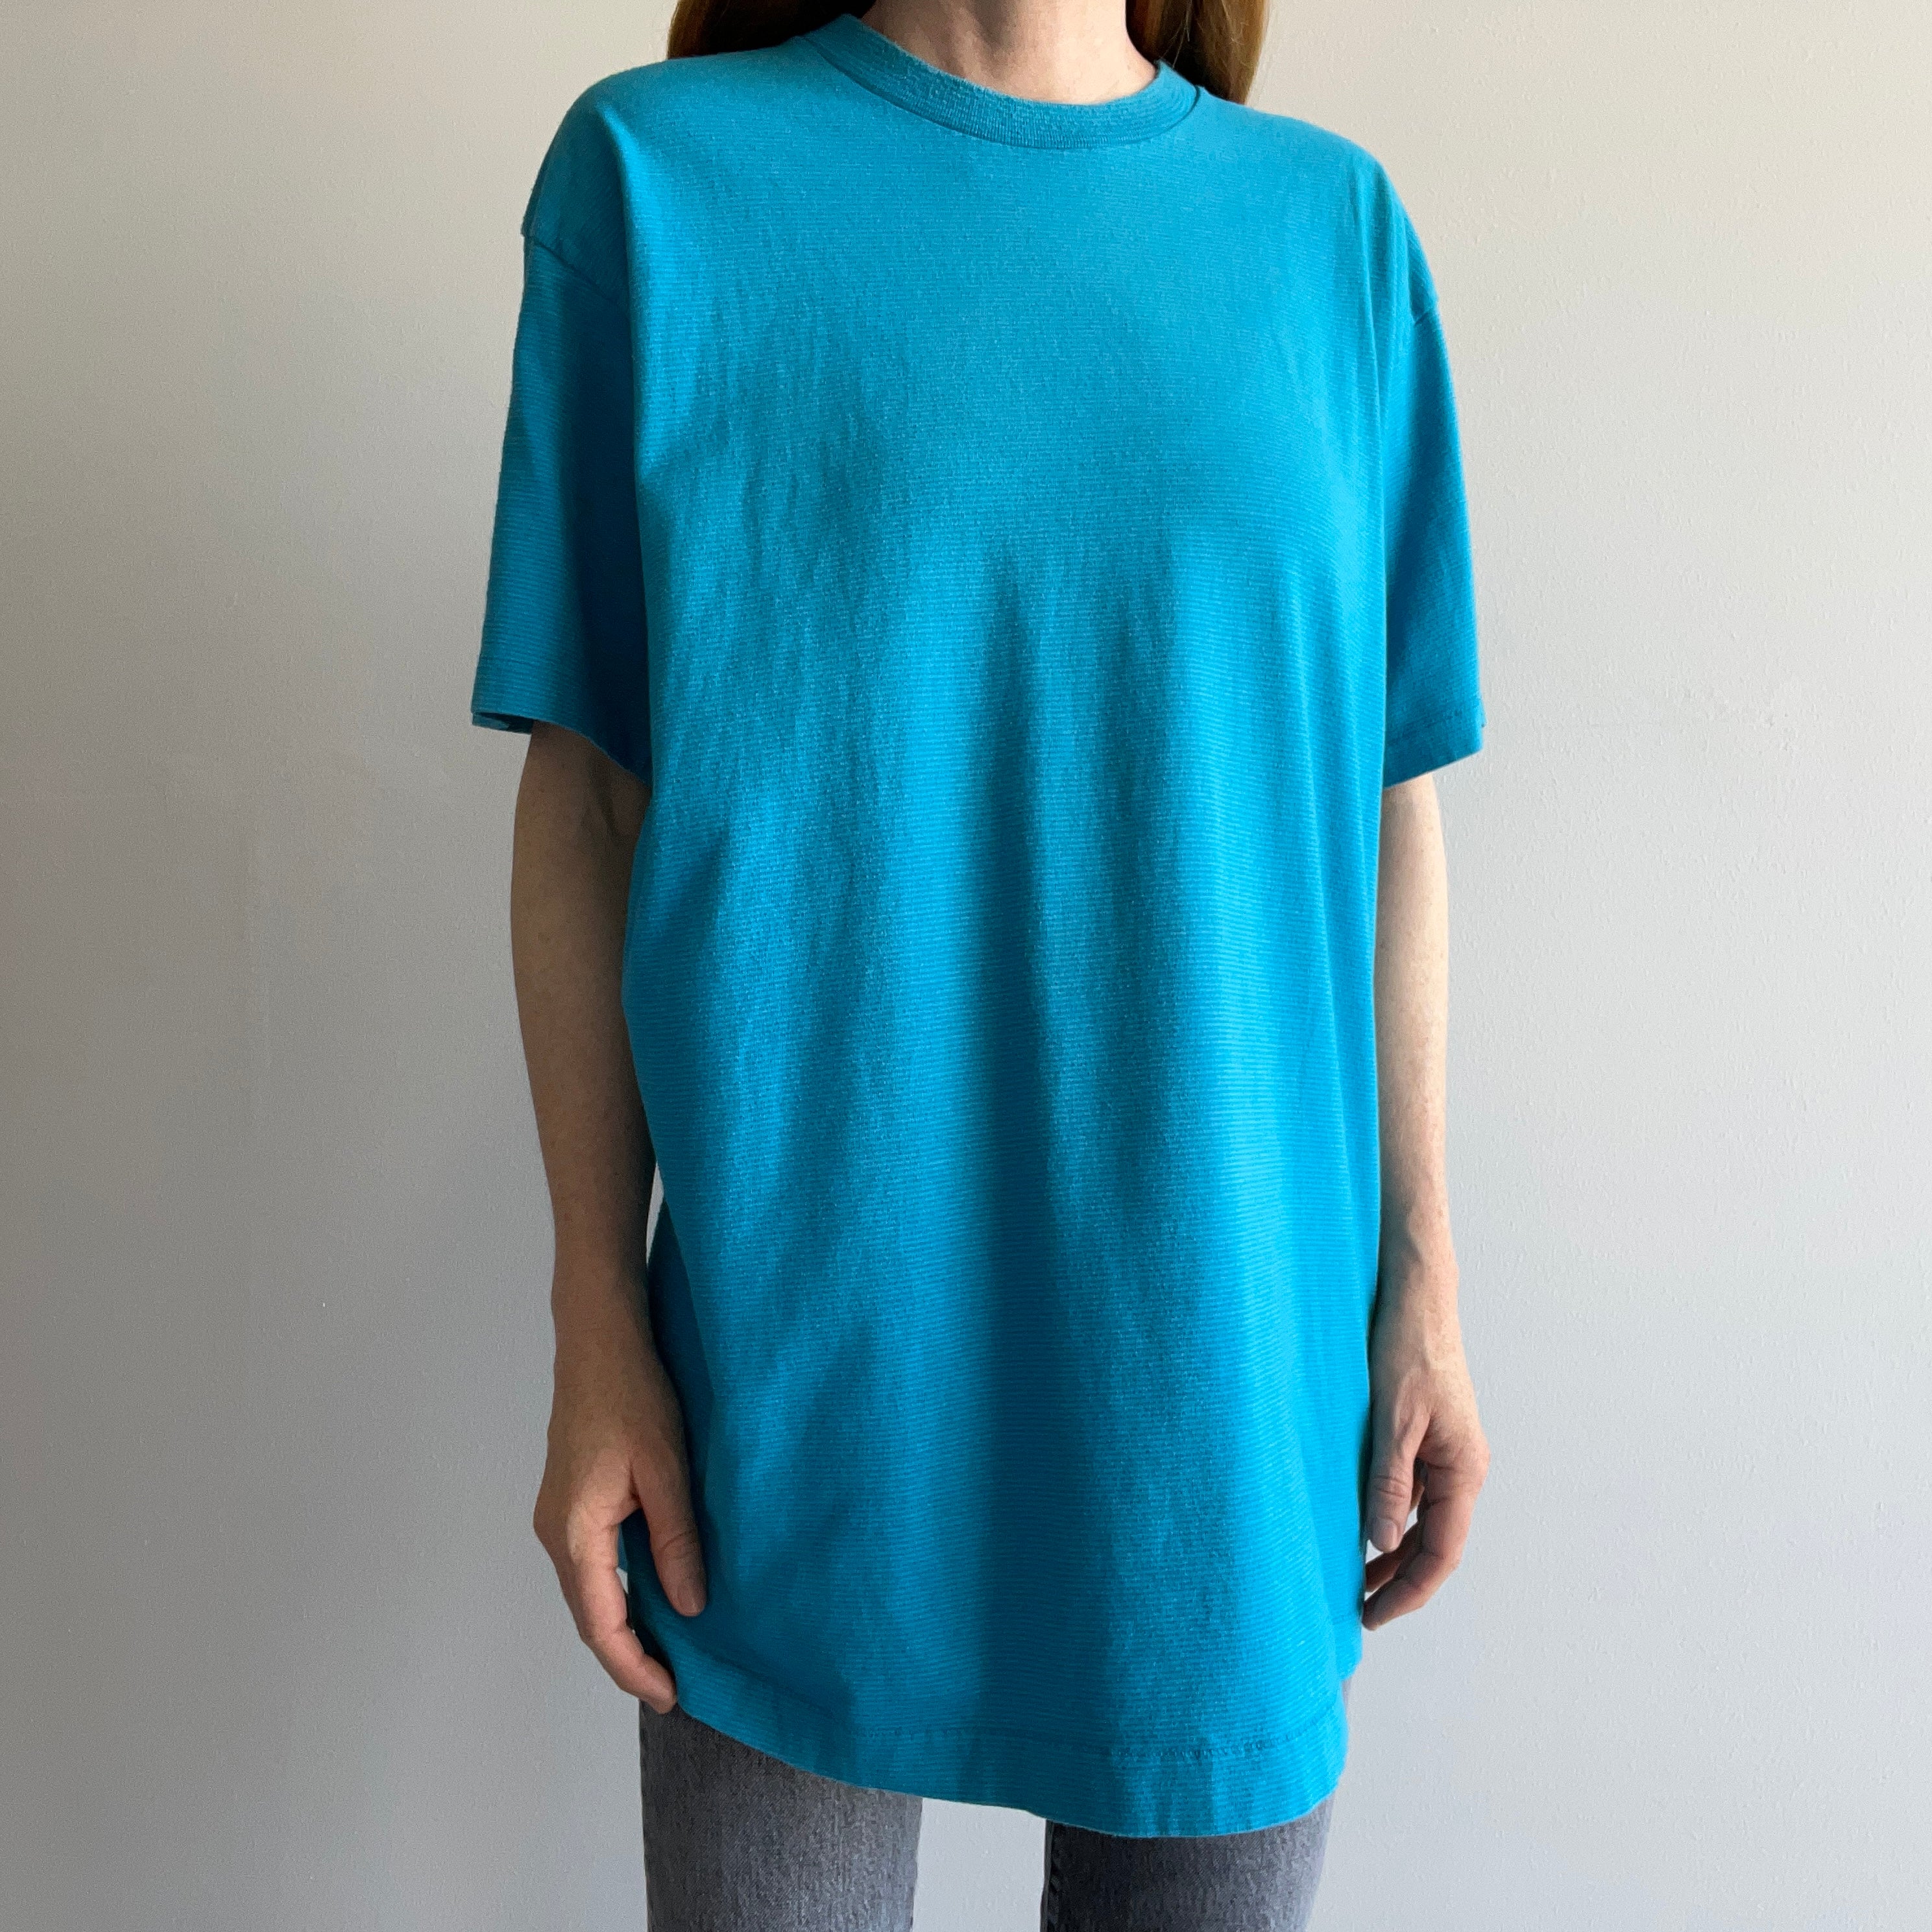 1980/90s Pin Striped Cotton T-Shirt (teal/turquoise/blue)